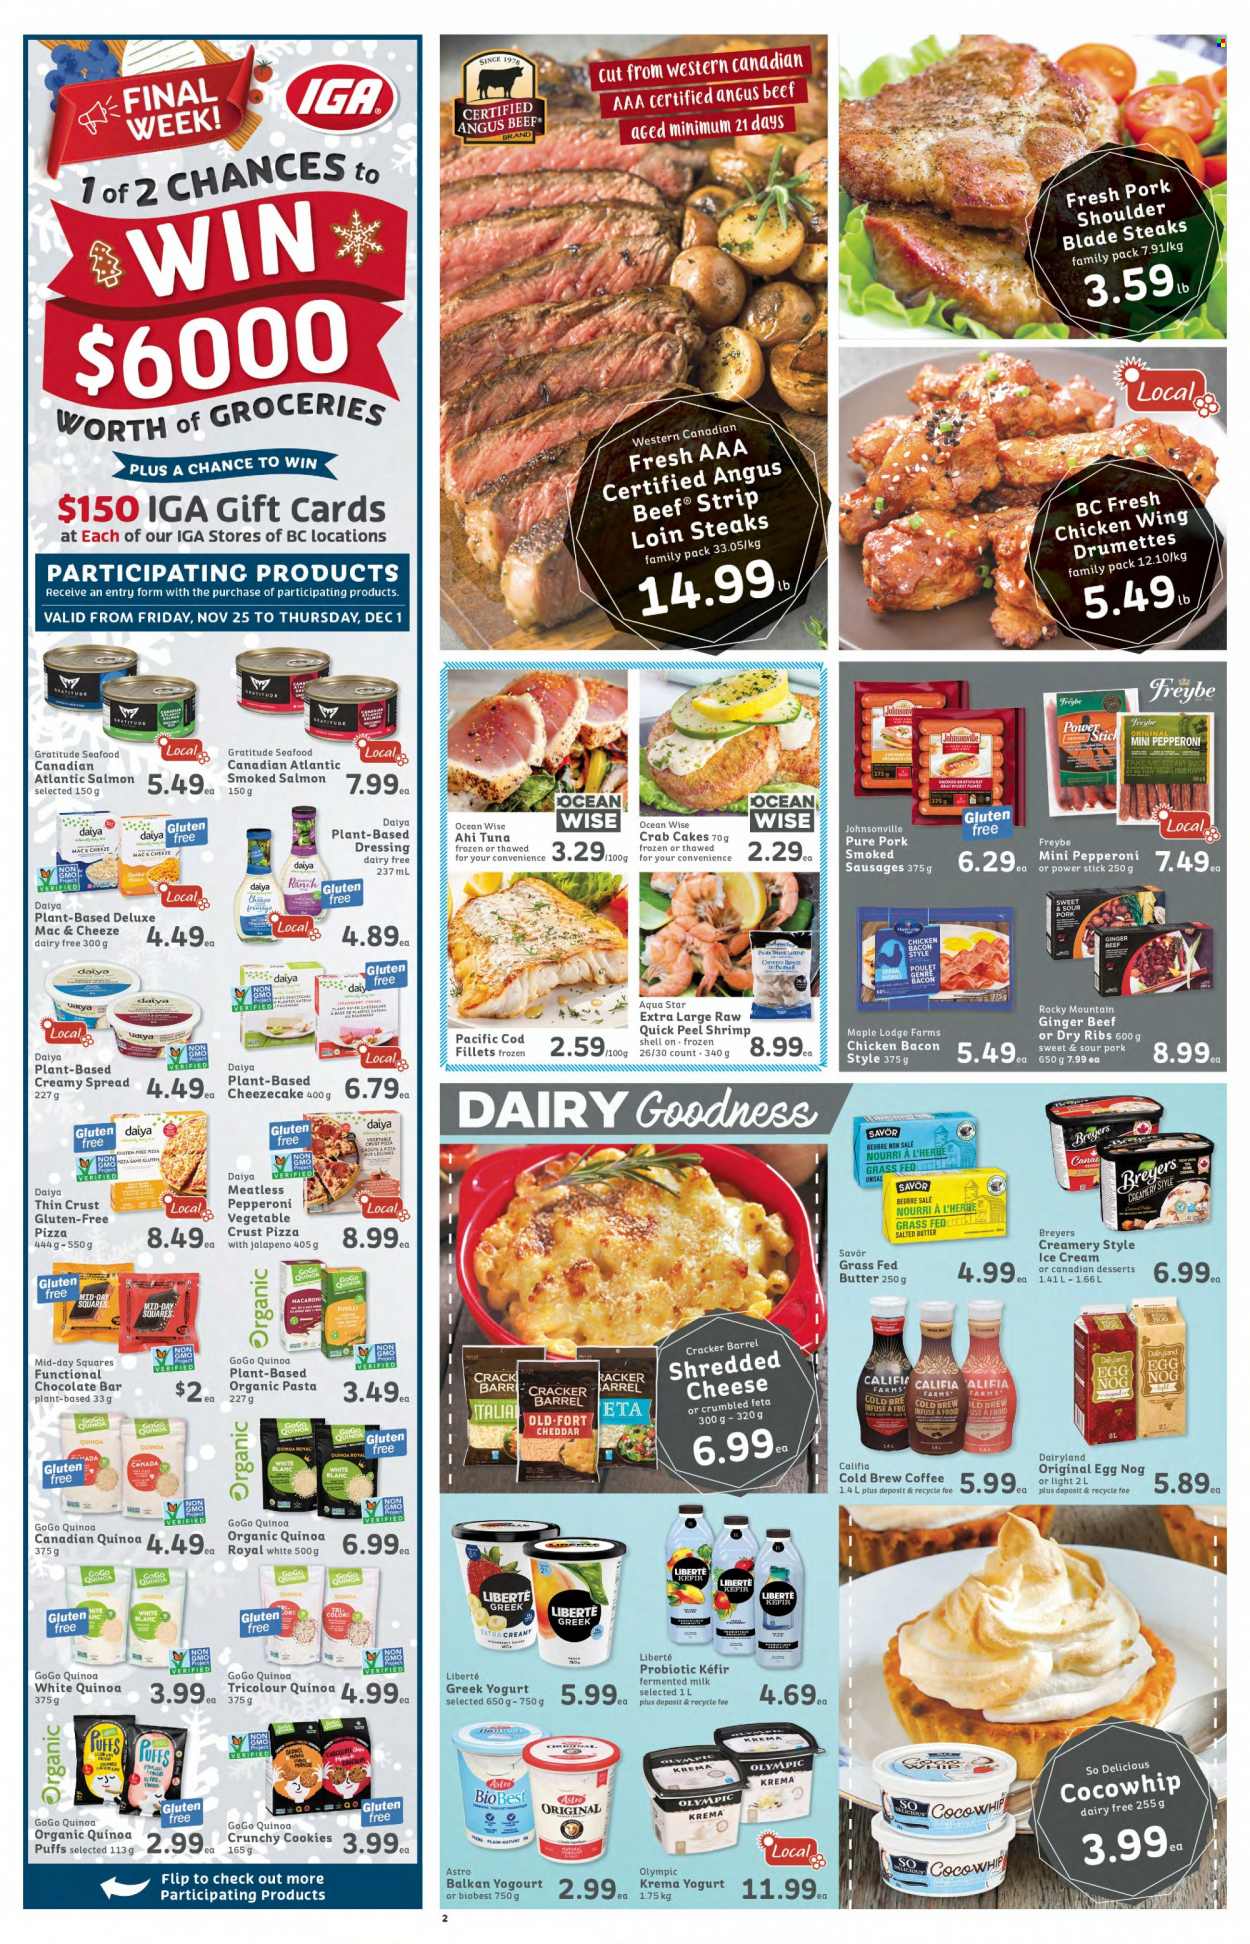 thumbnail - IGA Simple Goodness Flyer - November 25, 2022 - December 01, 2022 - Sales products - puffs, ginger, jalapeño, cod, salmon, smoked salmon, tuna, seafood, shrimps, crab cake, pizza, pasta, bacon, Johnsonville, sausage, pepperoni, shredded cheese, cheddar, feta, greek yoghurt, yoghurt, milk, kefir, eggs, butter, ice cream, cookies, crackers, chocolate bar, dressing, coffee, beef meat, pork meat, pork shoulder, quinoa, steak. Page 2.